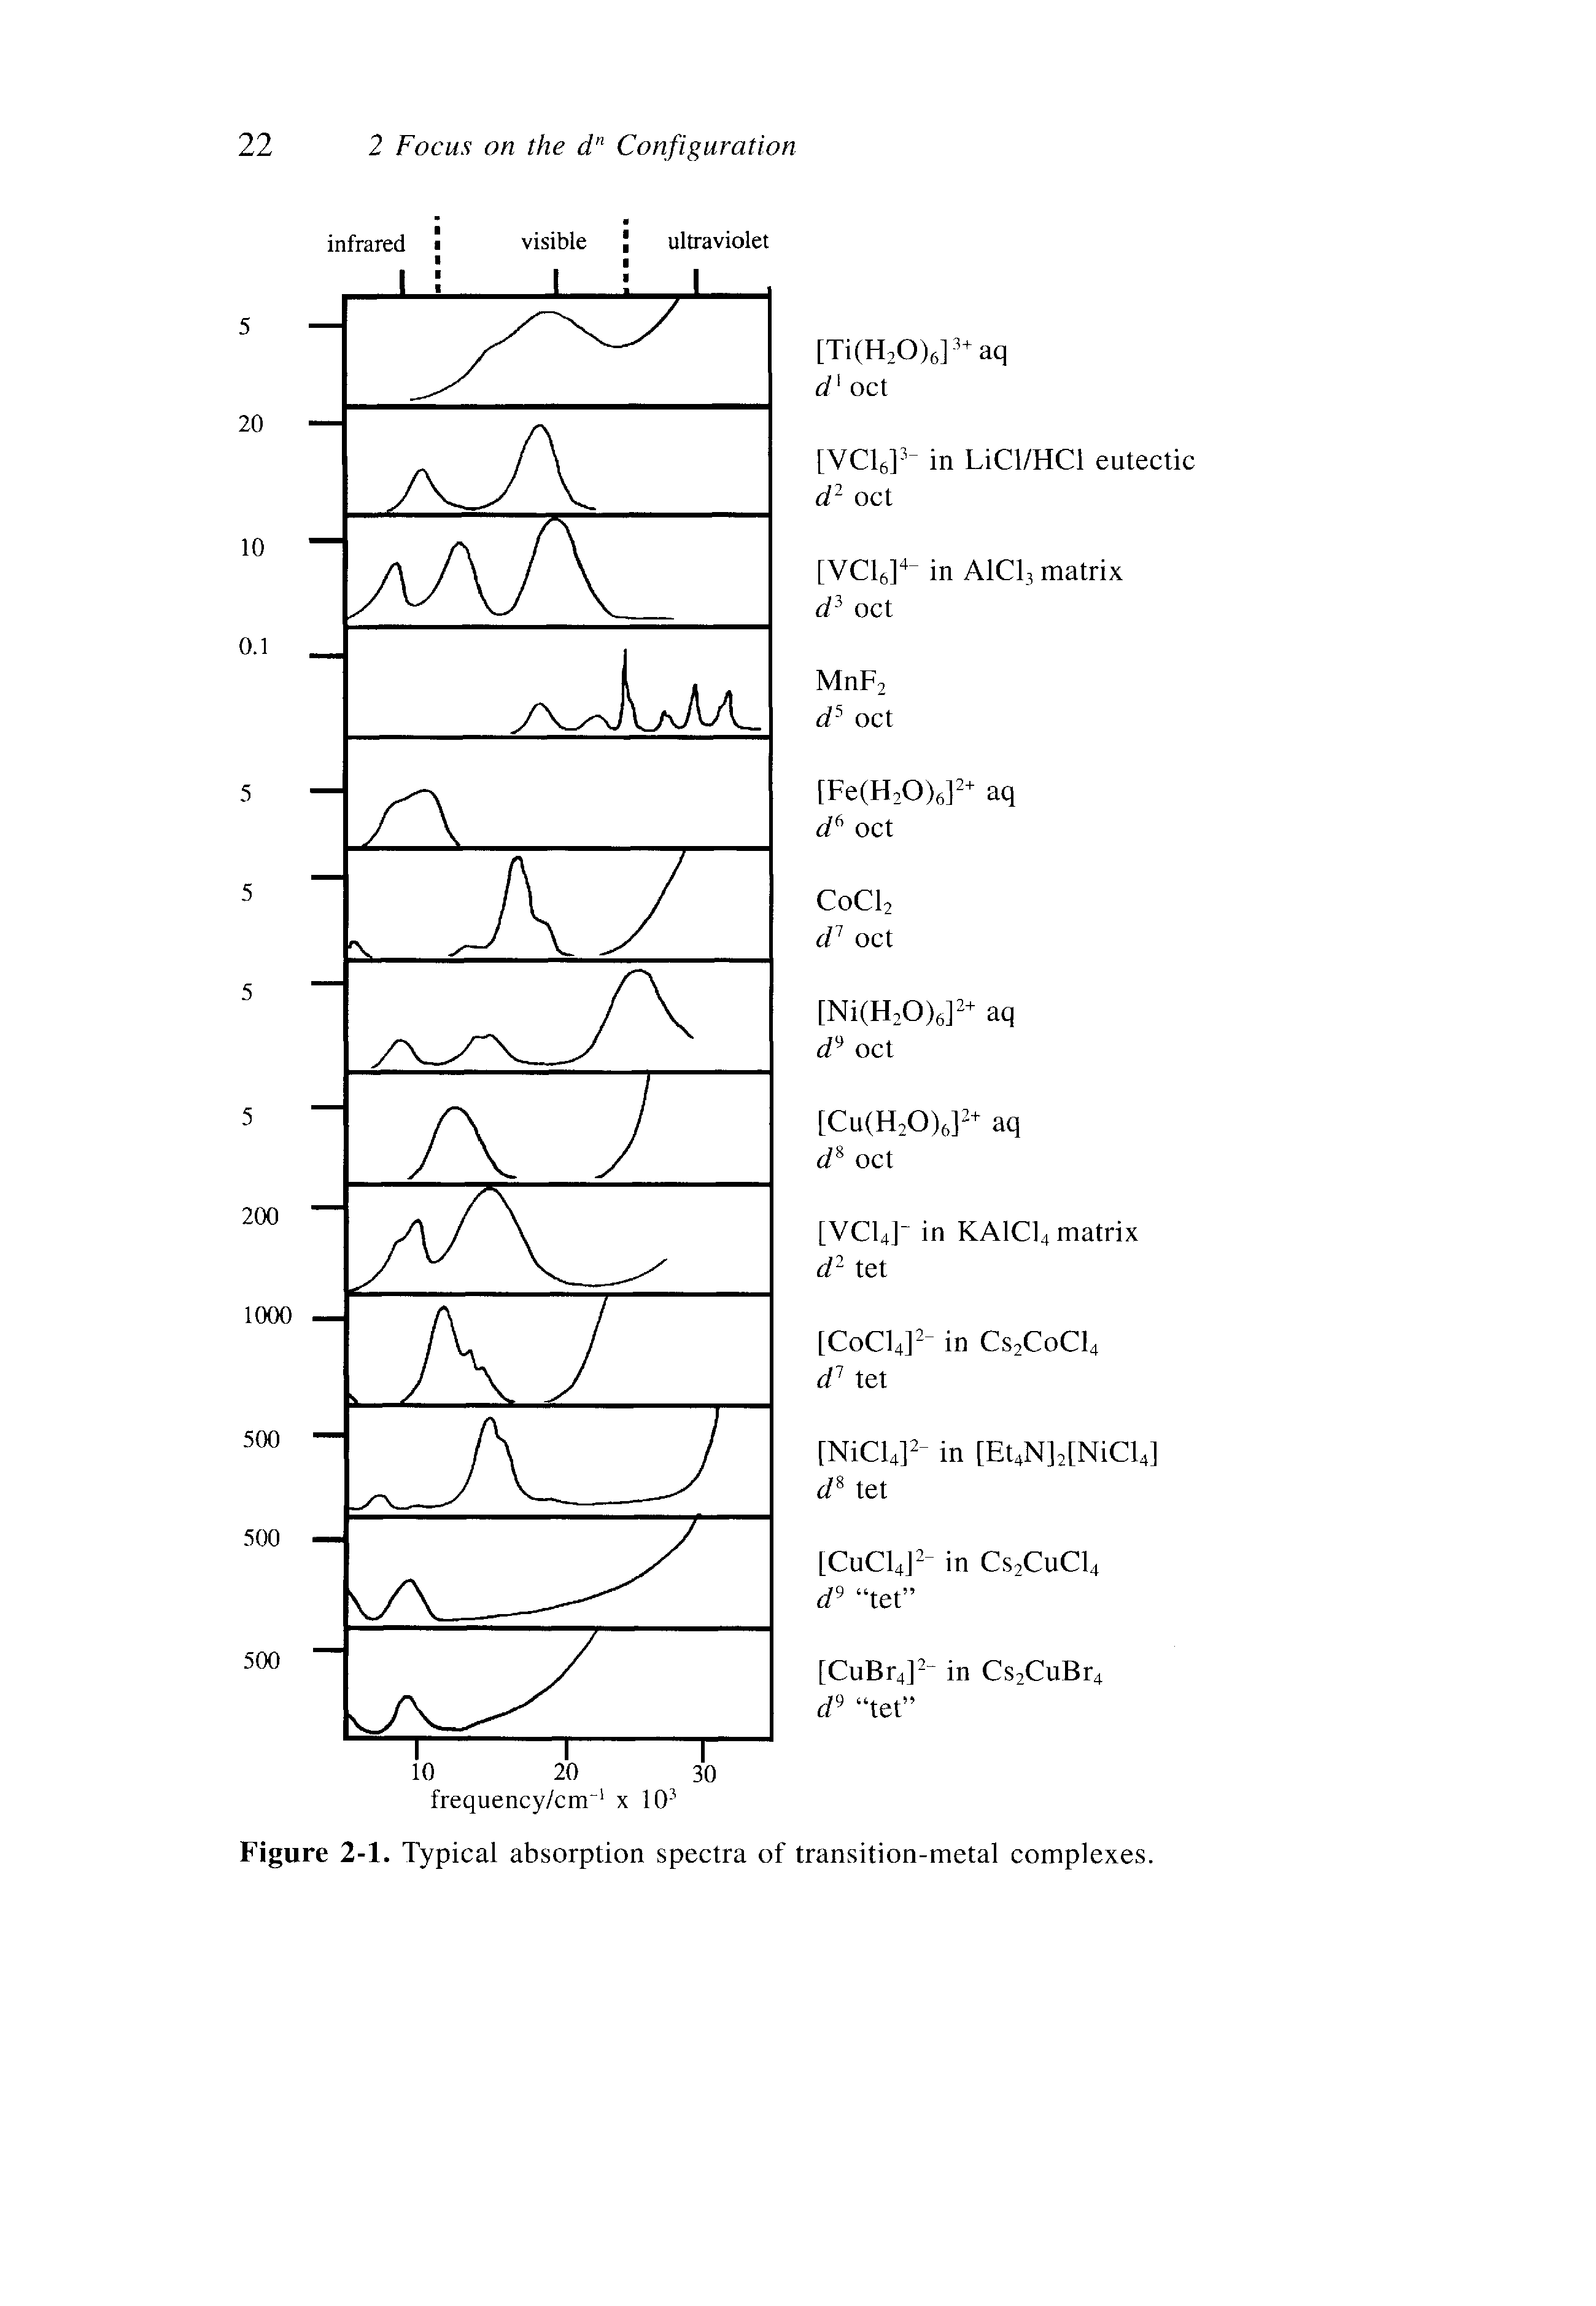 Figure 2-1. Typical absorption spectra of transition-metal complexes.